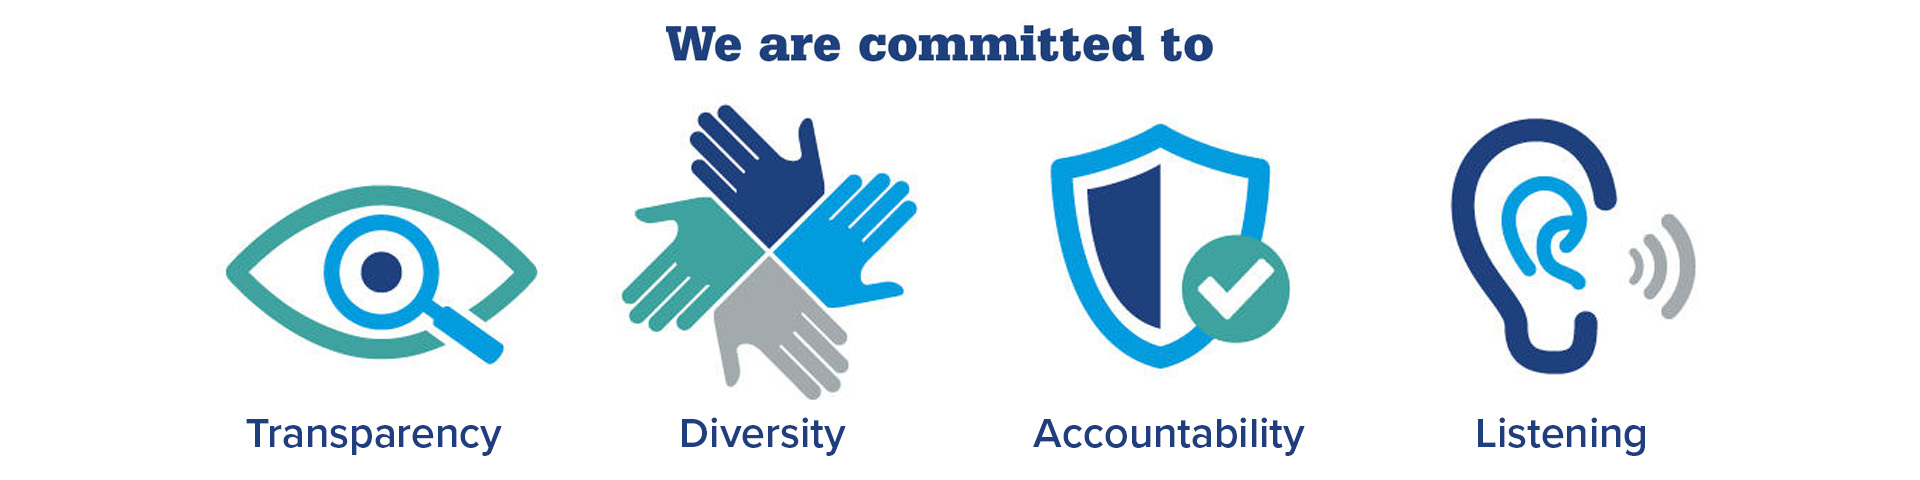 We are committed to Transparency, Diversity, Accountability, and Listening